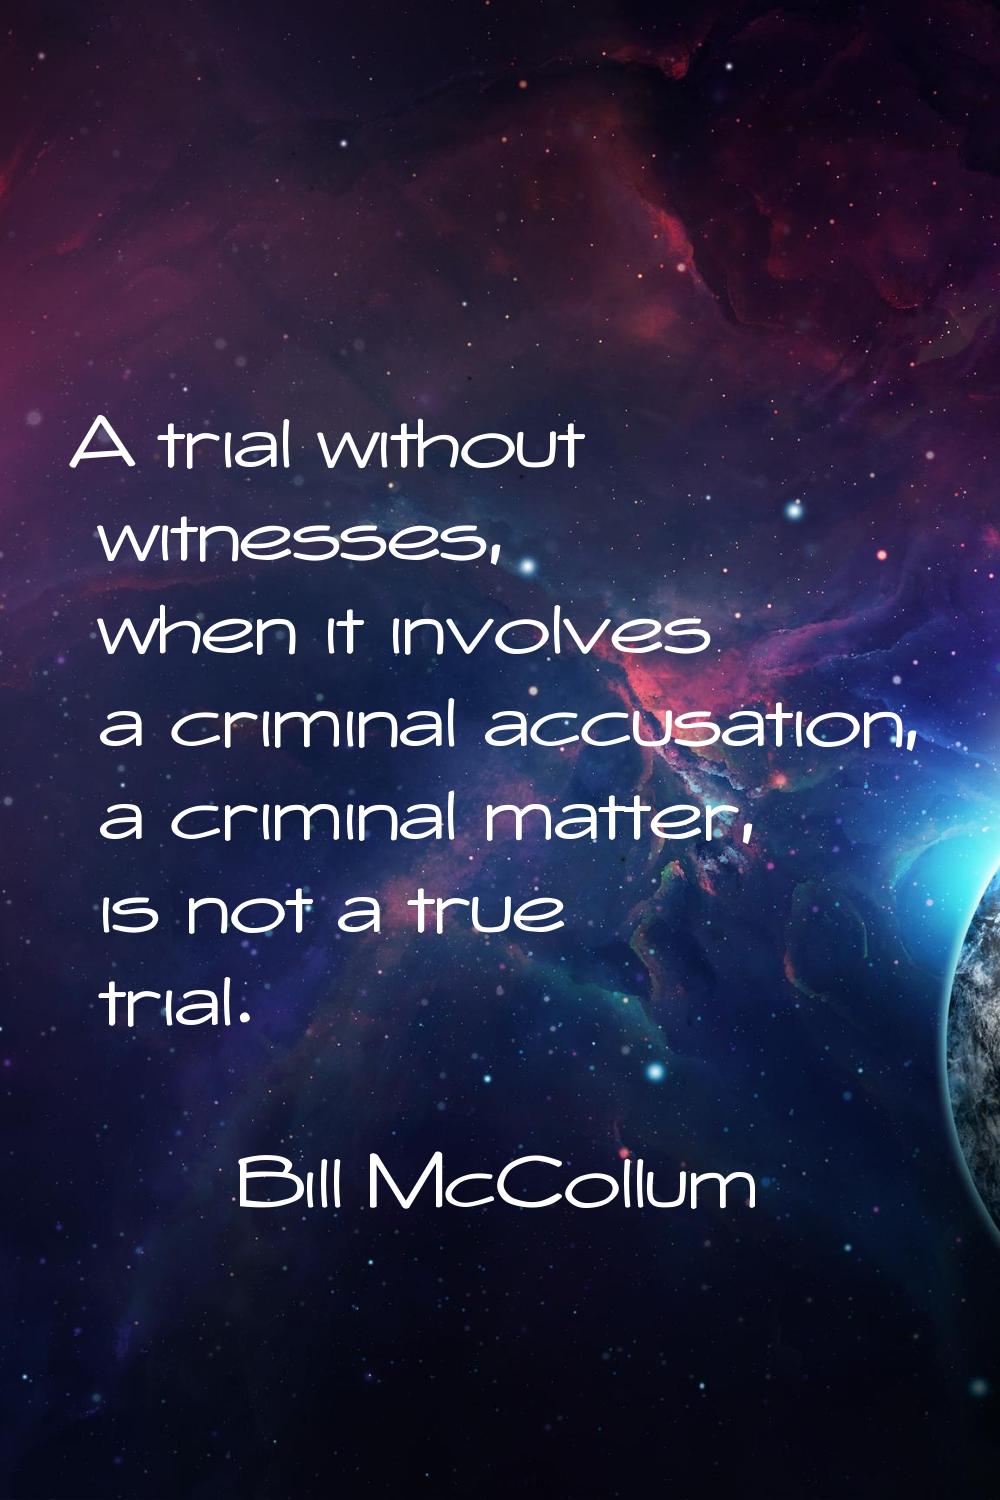 A trial without witnesses, when it involves a criminal accusation, a criminal matter, is not a true